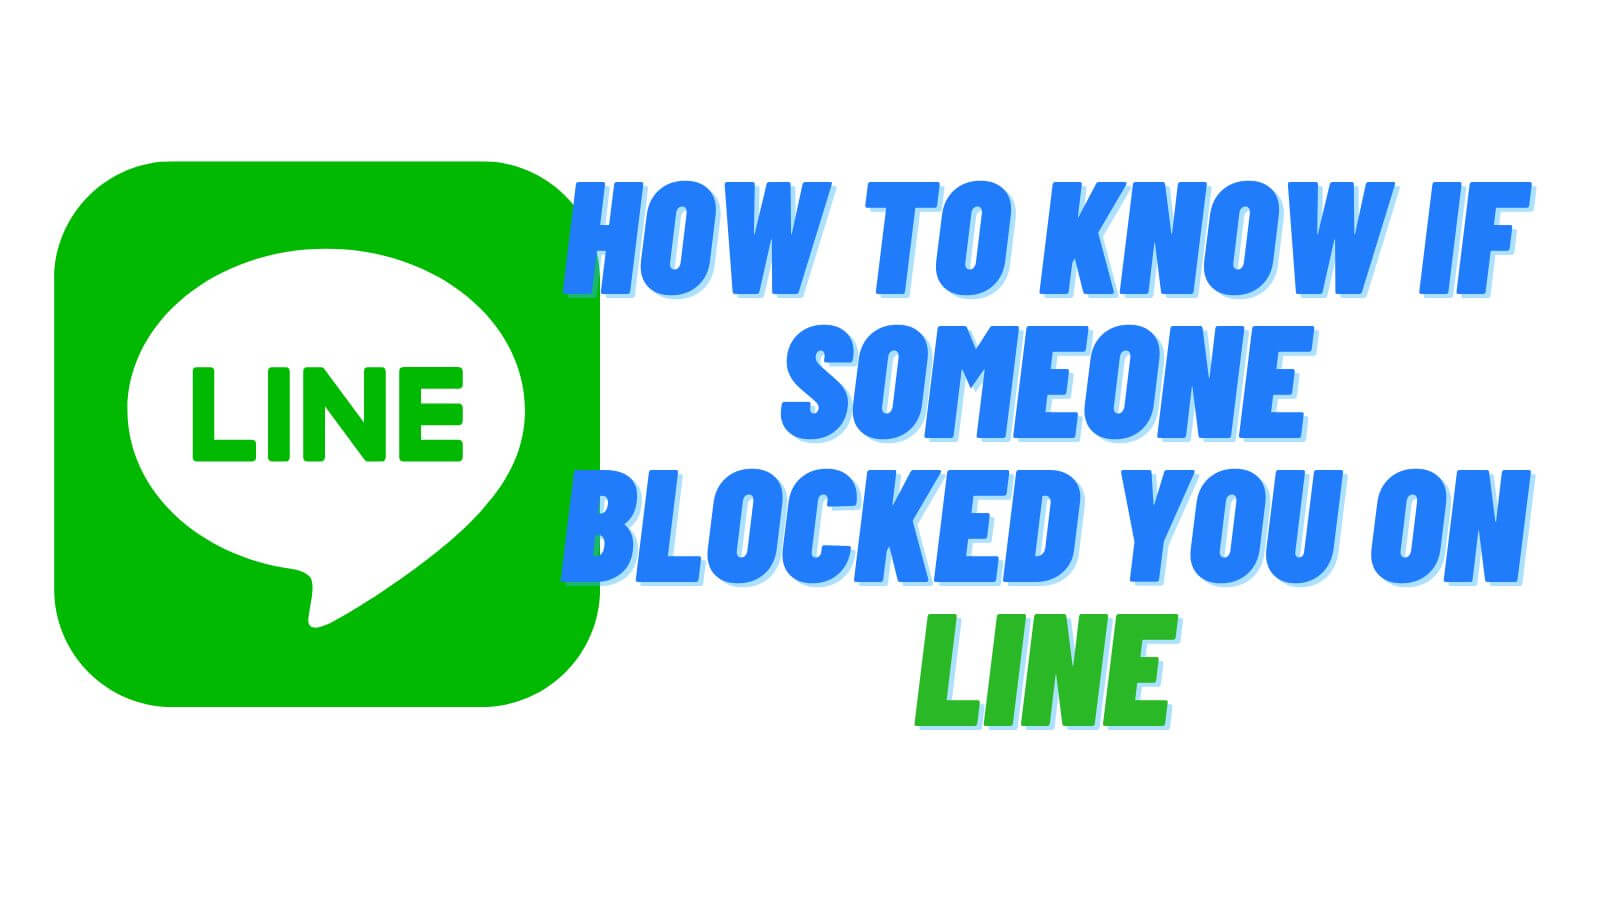 How to Know If Someone Blocked You on LINE